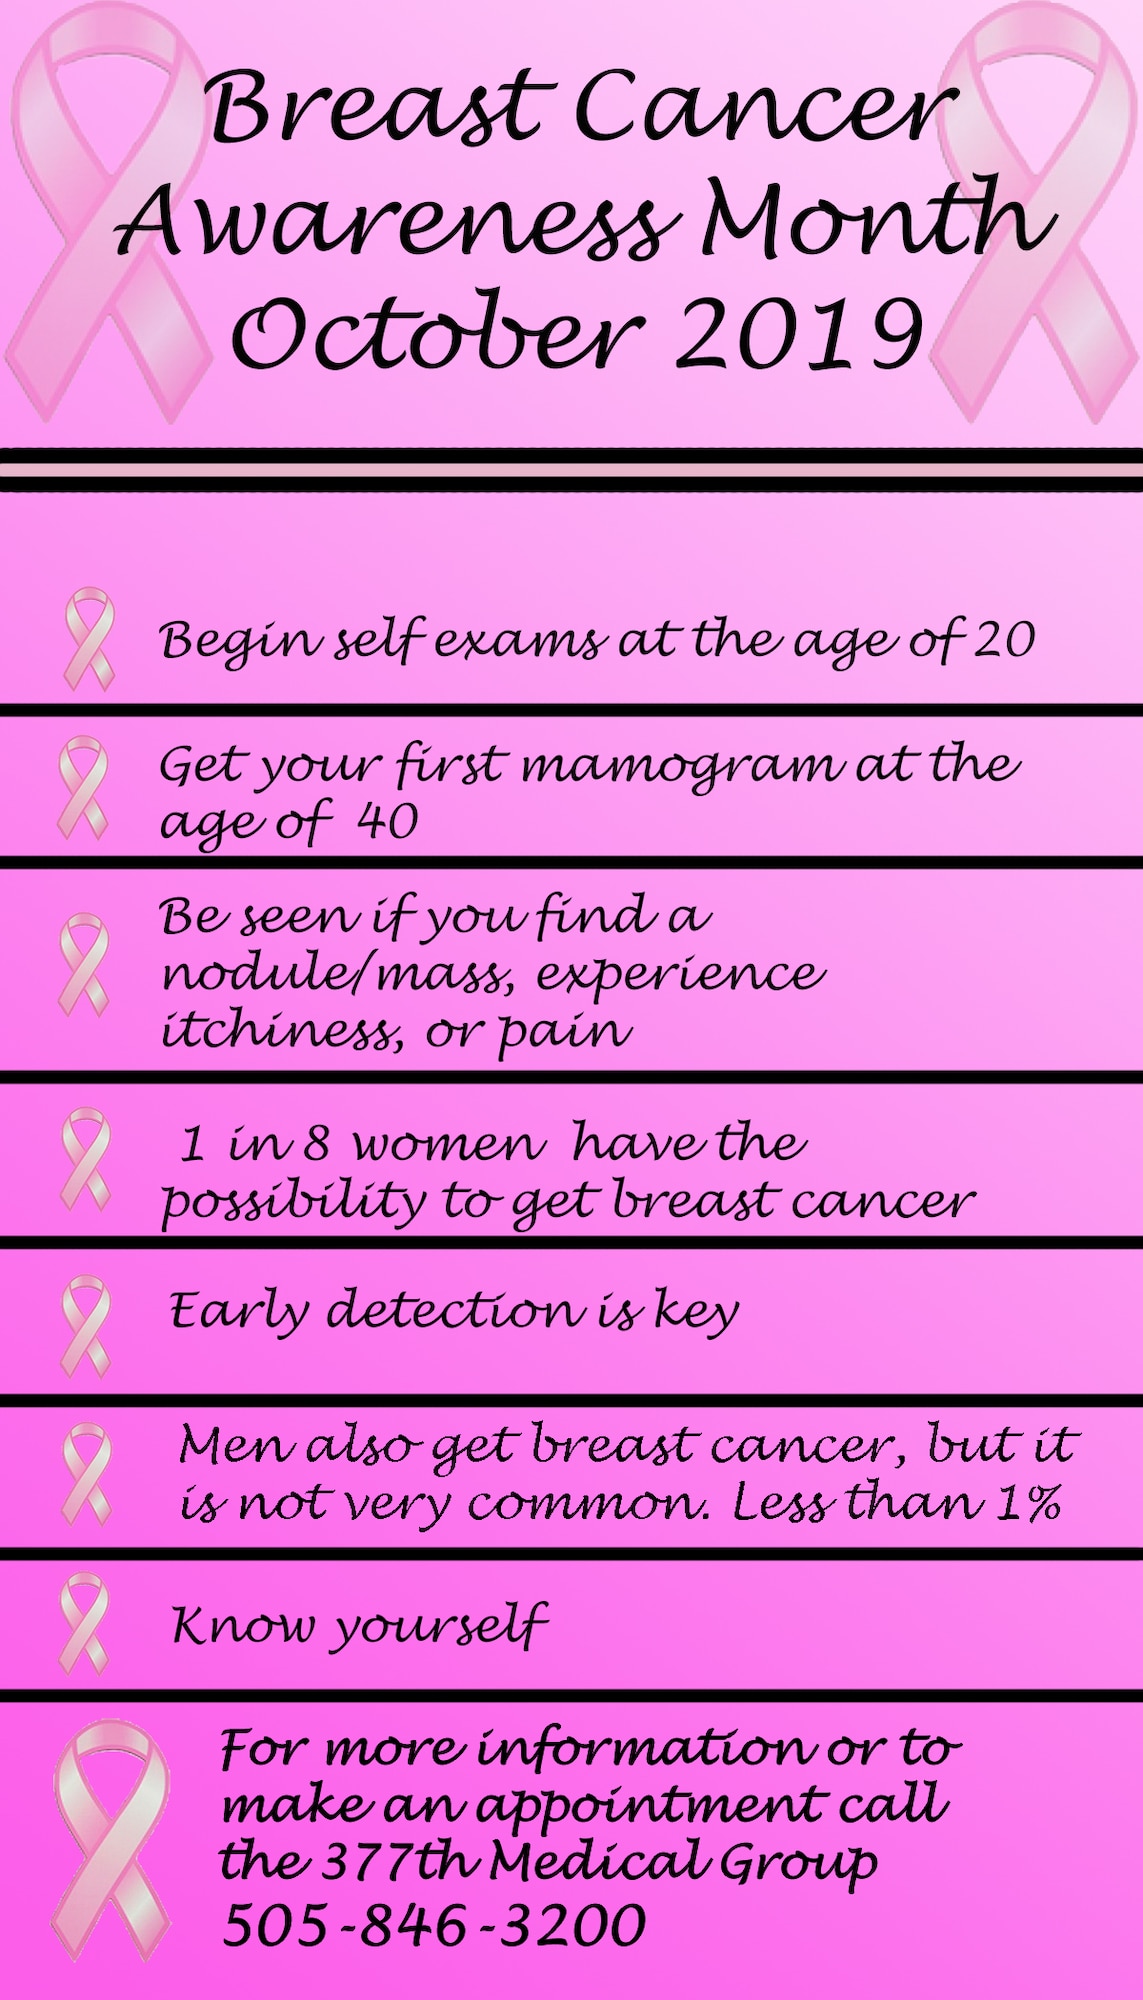 Every year October brings not only awareness but the reminder that breast cancer is real and can affect 1 in 8 women. The 377th Medical Group encourages those at the age of 20 to begin self-exams and to get your first mammogram at the age of 40. (U.S. Air Force graphic by Staff Sgt. Kimberly Nagle)